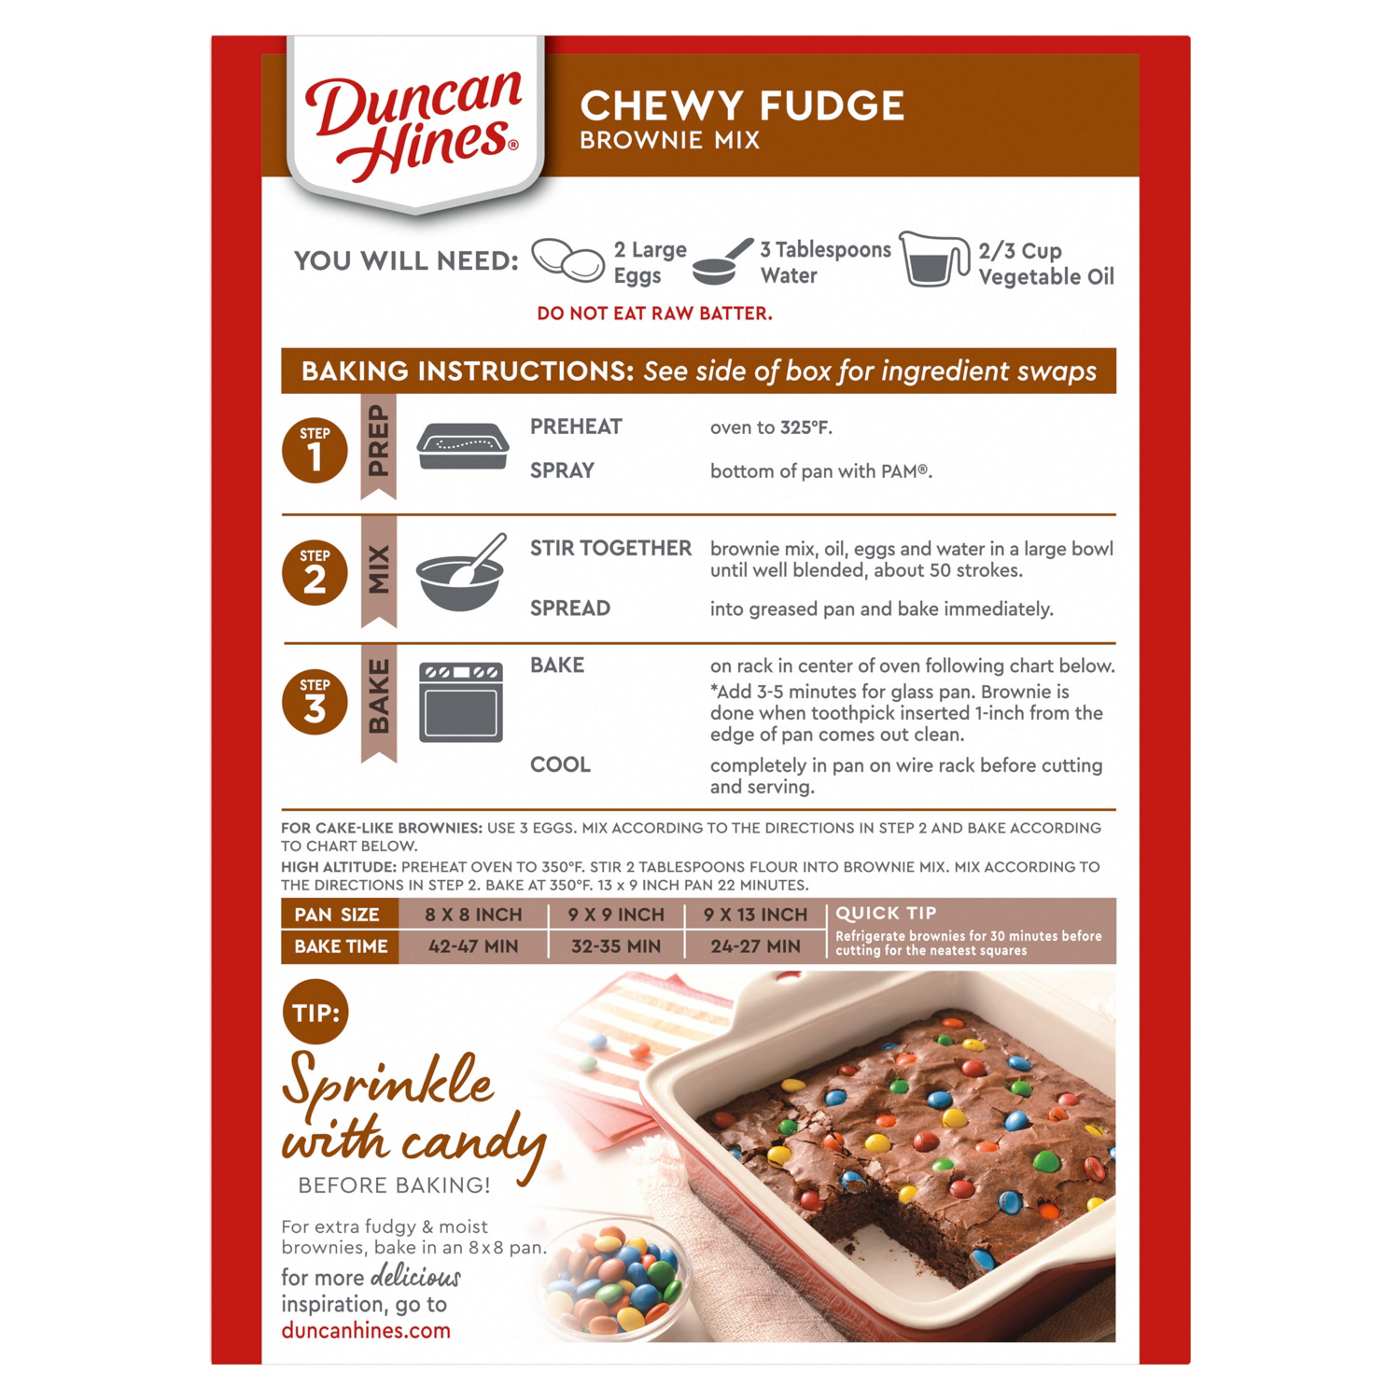 Duncan Hines Chewy Fudge Brownie Mix; image 2 of 7